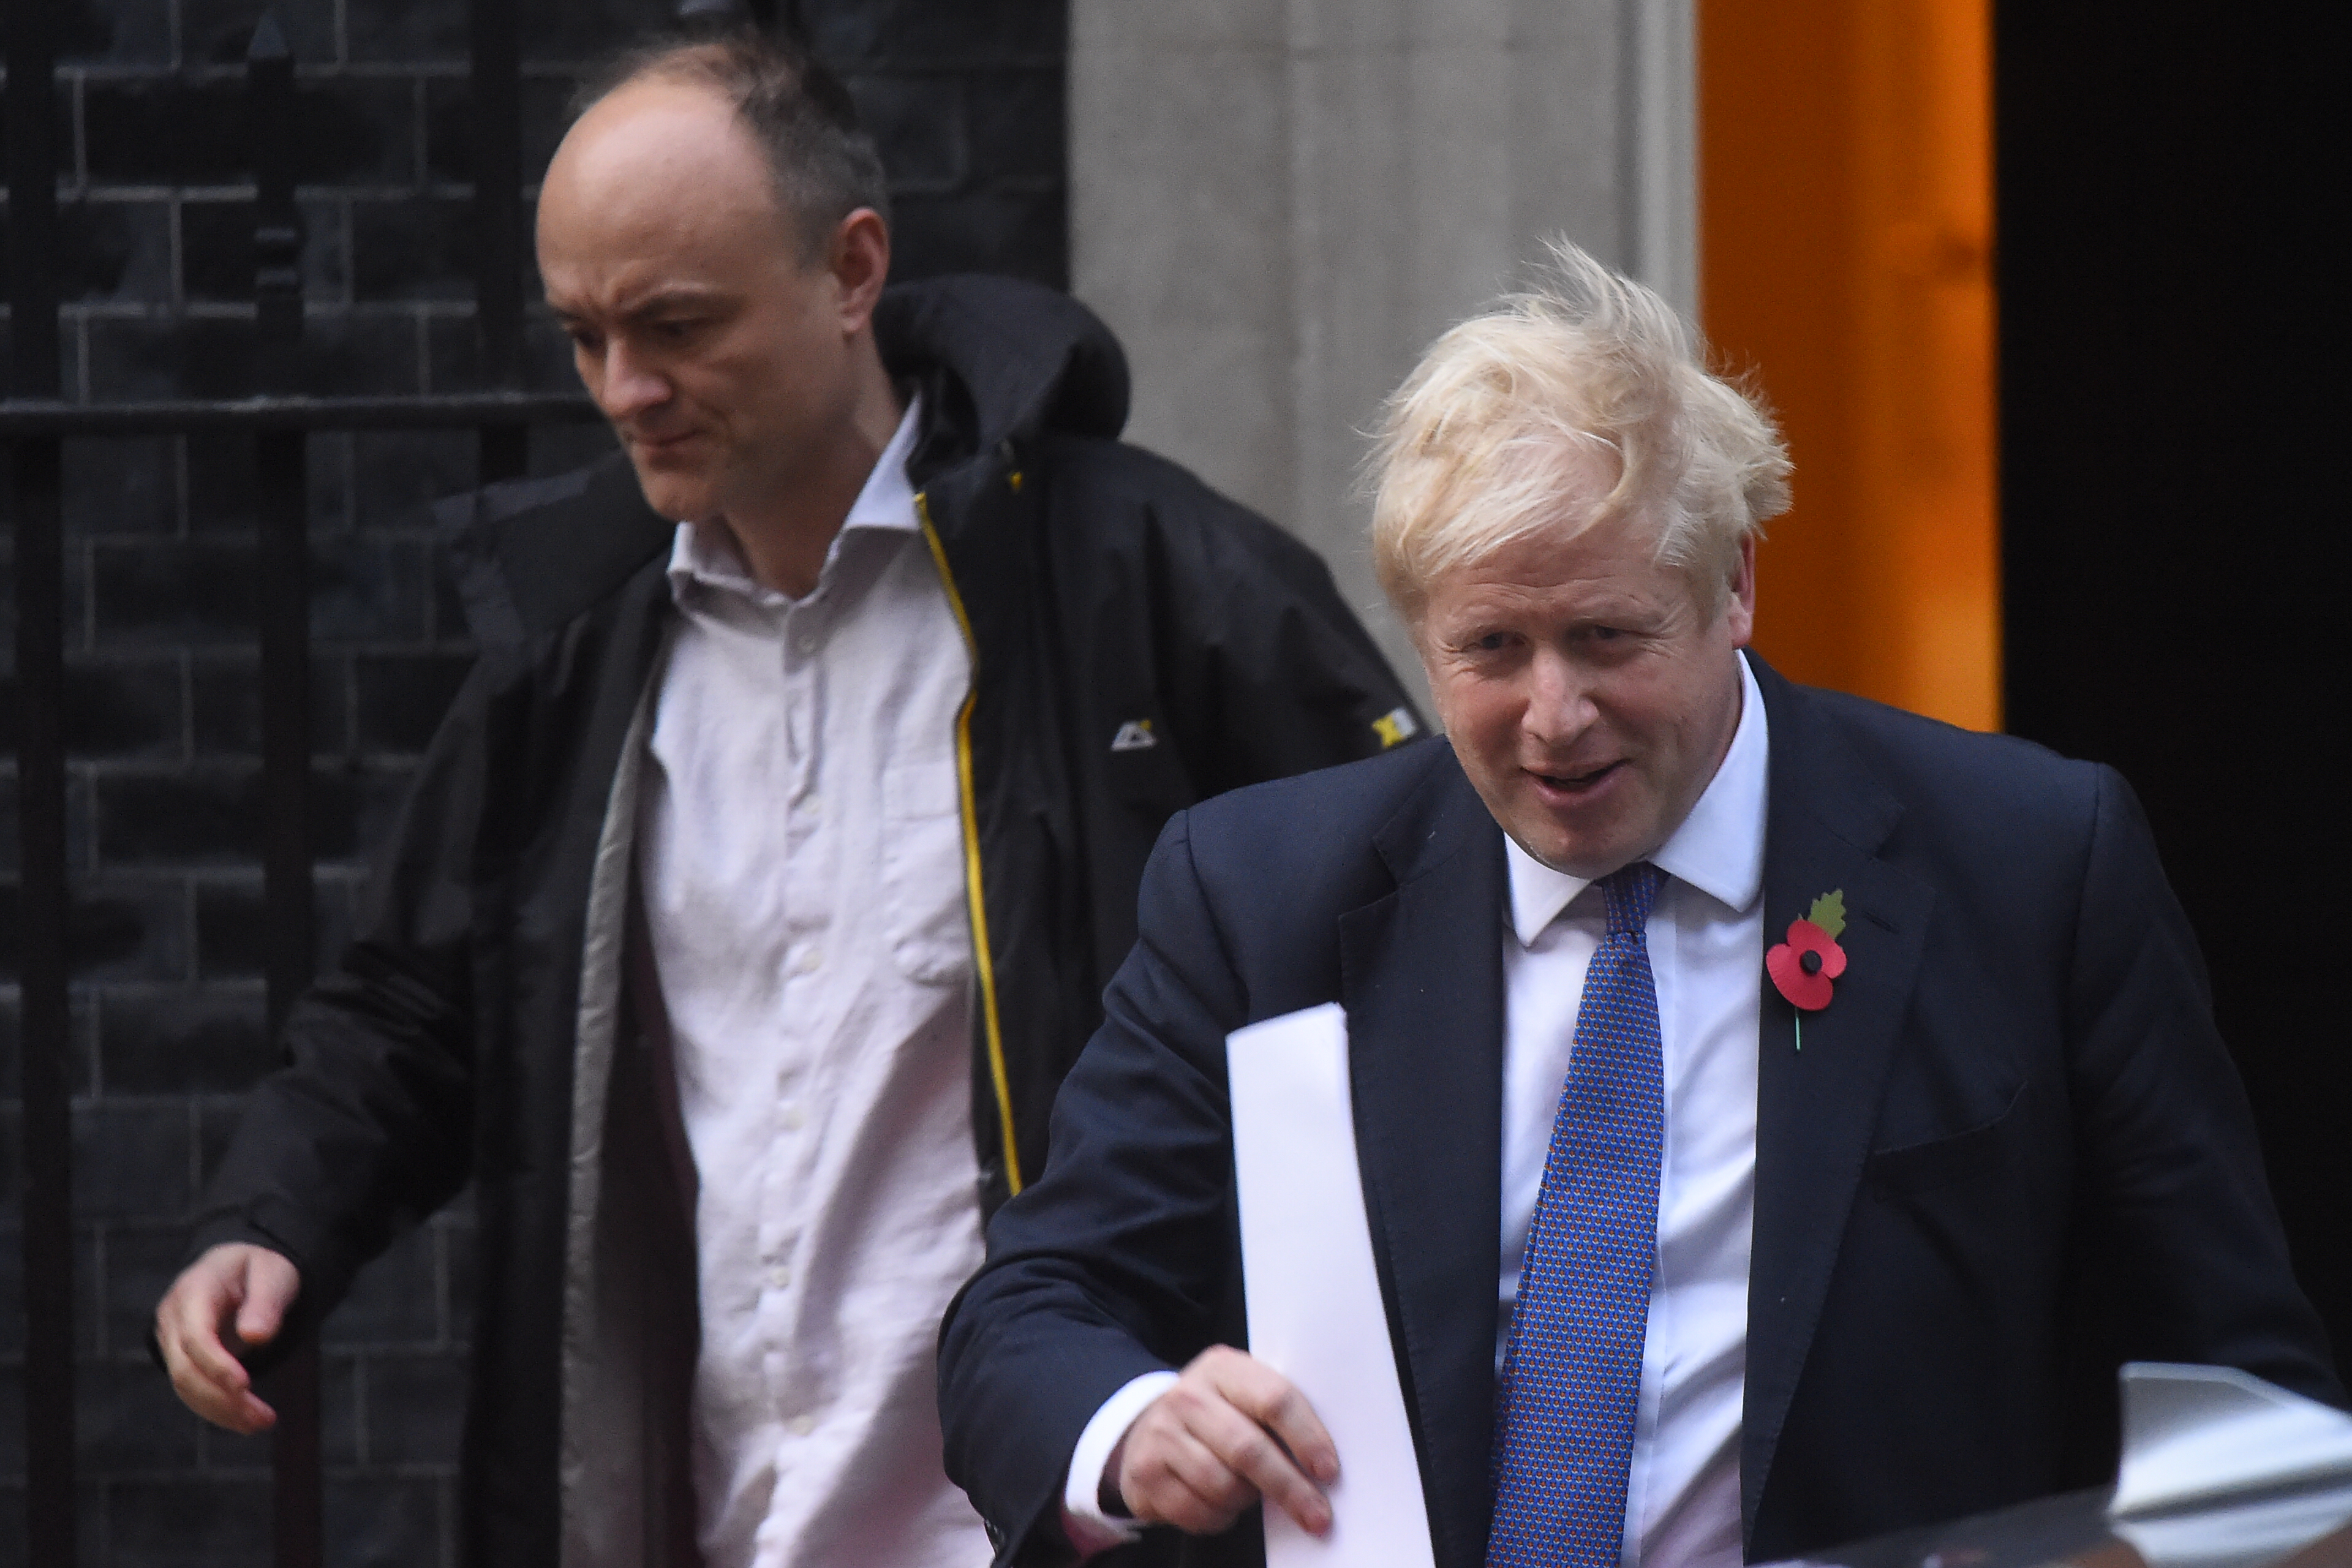 Prior to that, Johnson defended chief adviser Dominic Cummings, after he travelled to his parents' property in Durham with his wife and child at the height of the pandemic in a possible breach of lockdown rules. The relationship between the pair - who had worked together on the Brexit campaign - would sour by November 2020 and Cummings was sacked for allegedly briefing against Johnson's wife, Carrie Symonds.